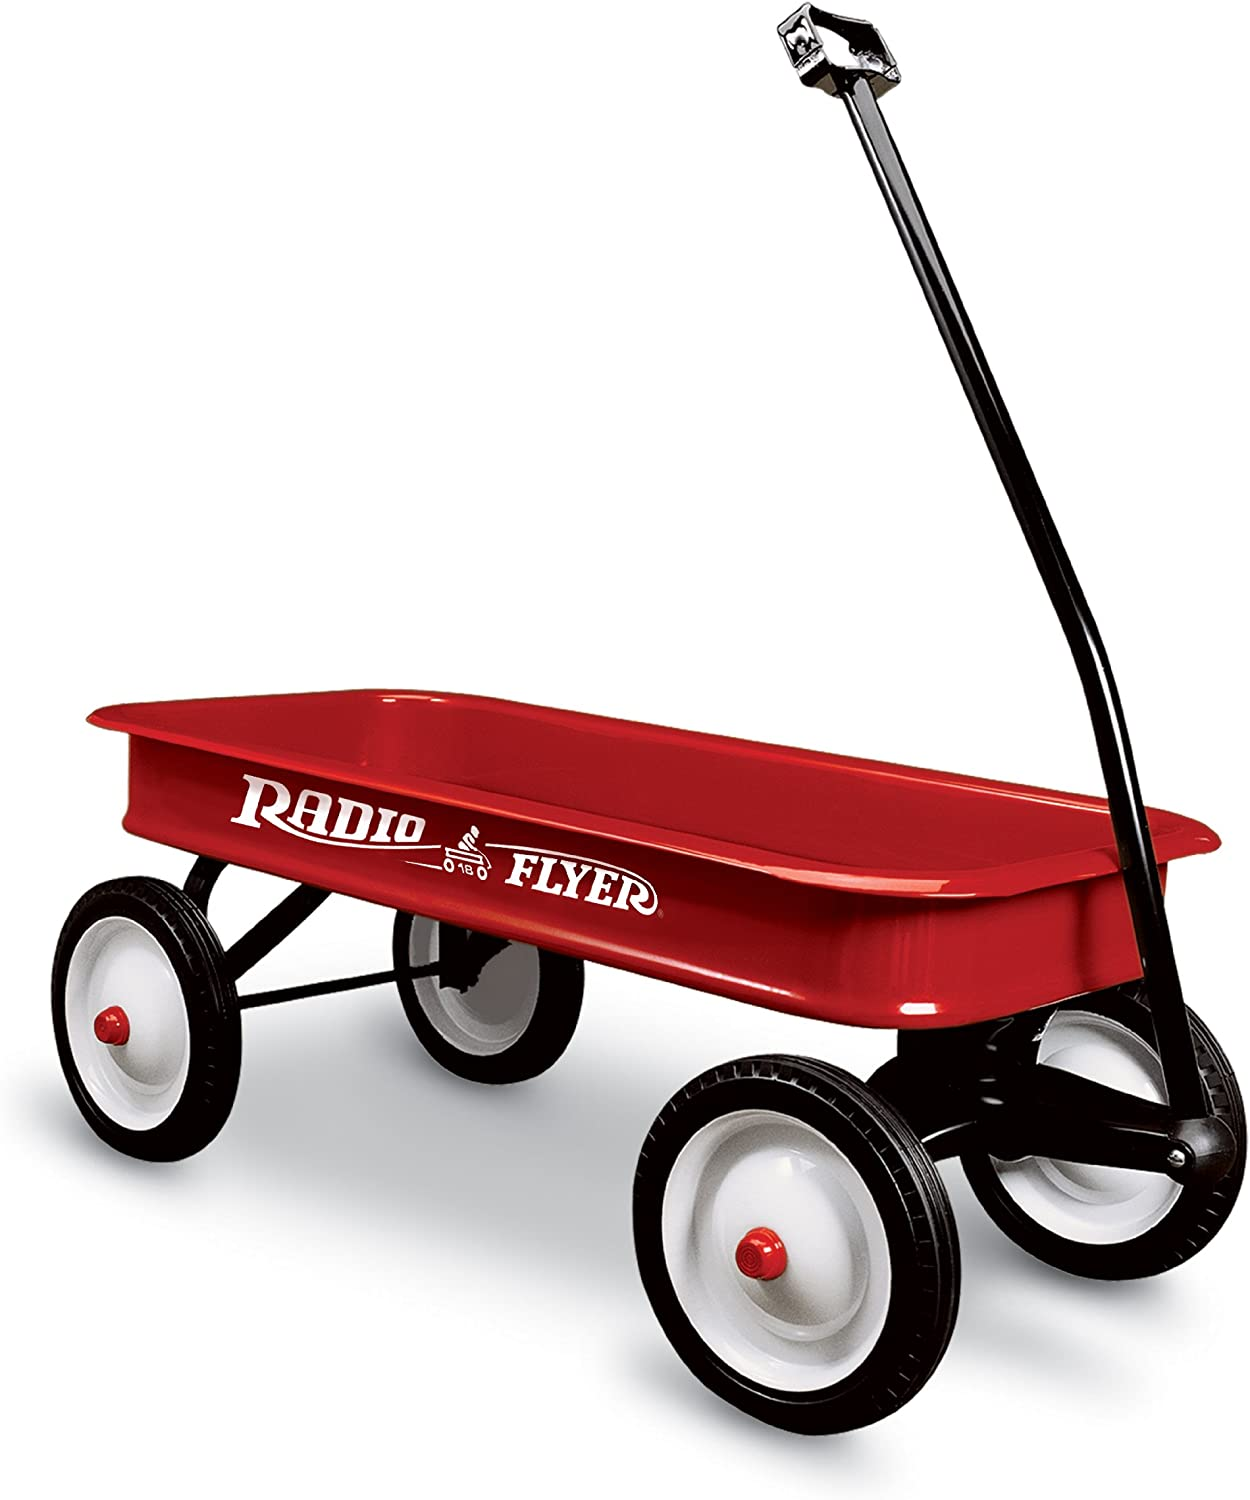 "well, a Radio Flyer wagon also has a bed, four wheels and... 